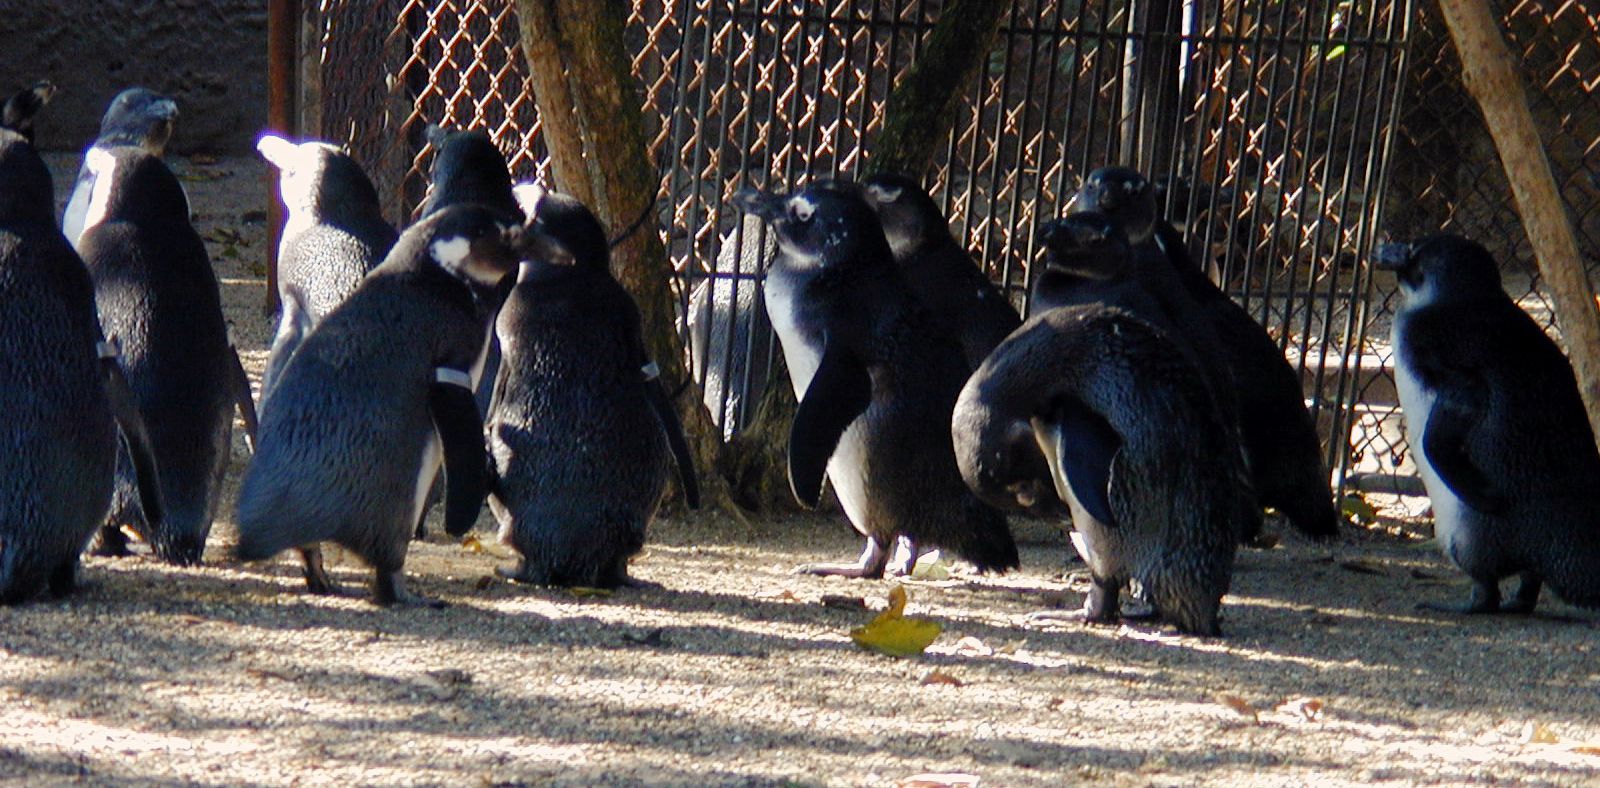 penguins group waiters together black white cleaning